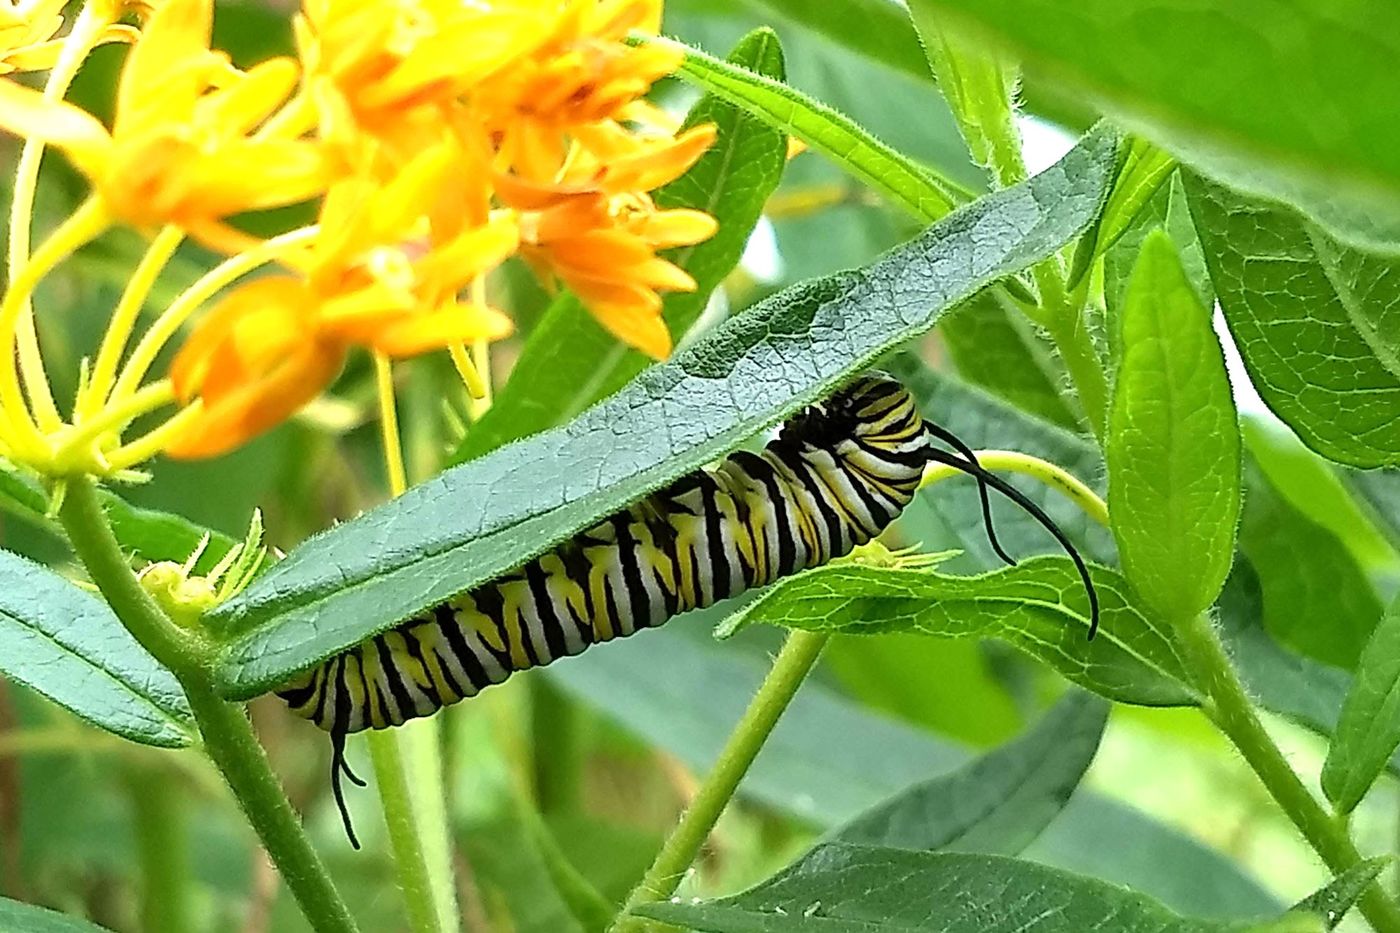 “This morning I discovered a 4th instar! I was so delighted.” Monarch caterpillars grow longer and develop new features at different stages of growth, called instars.